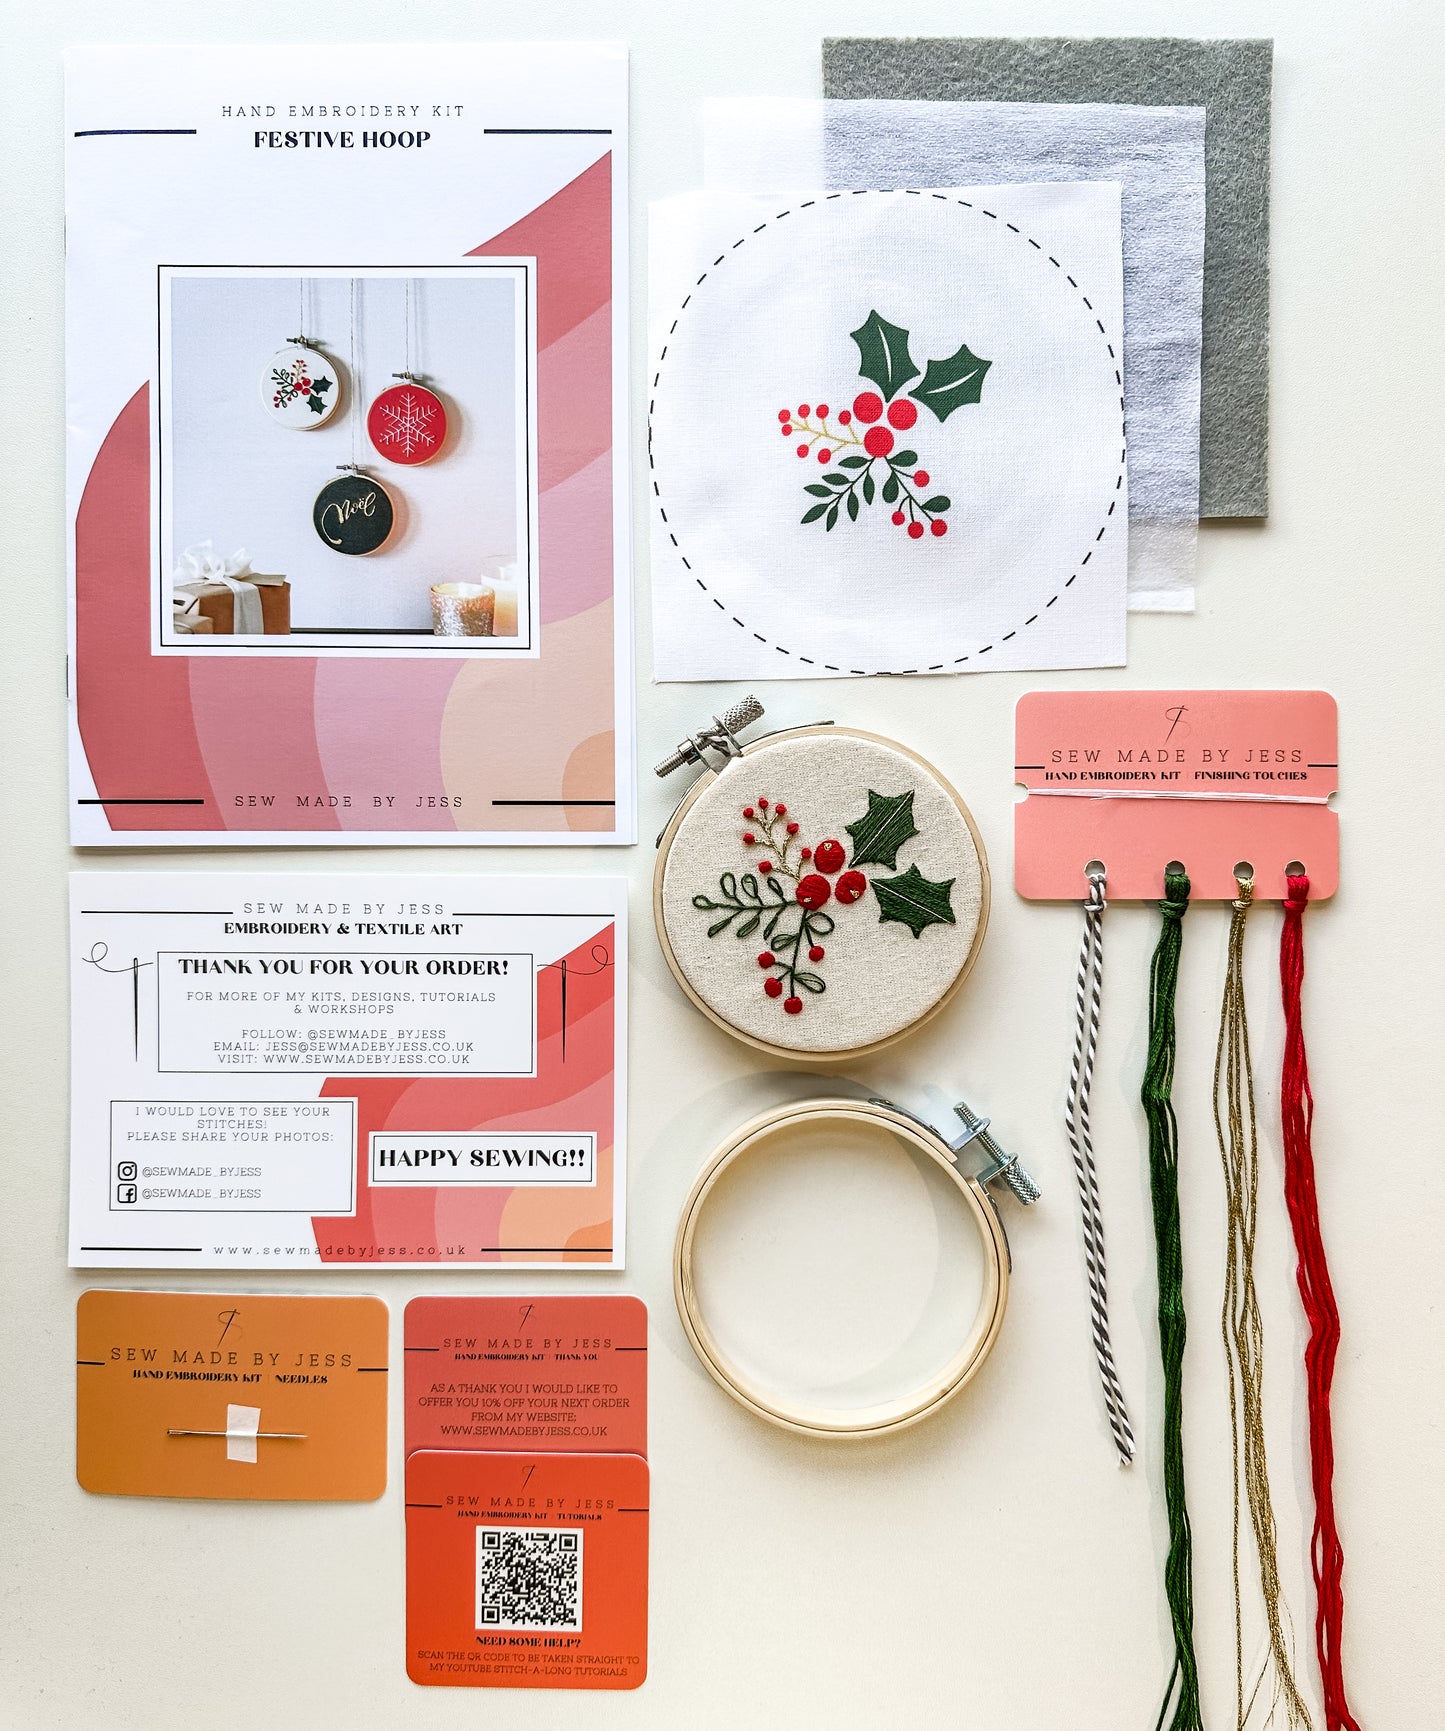 Holly Embroidery Kit